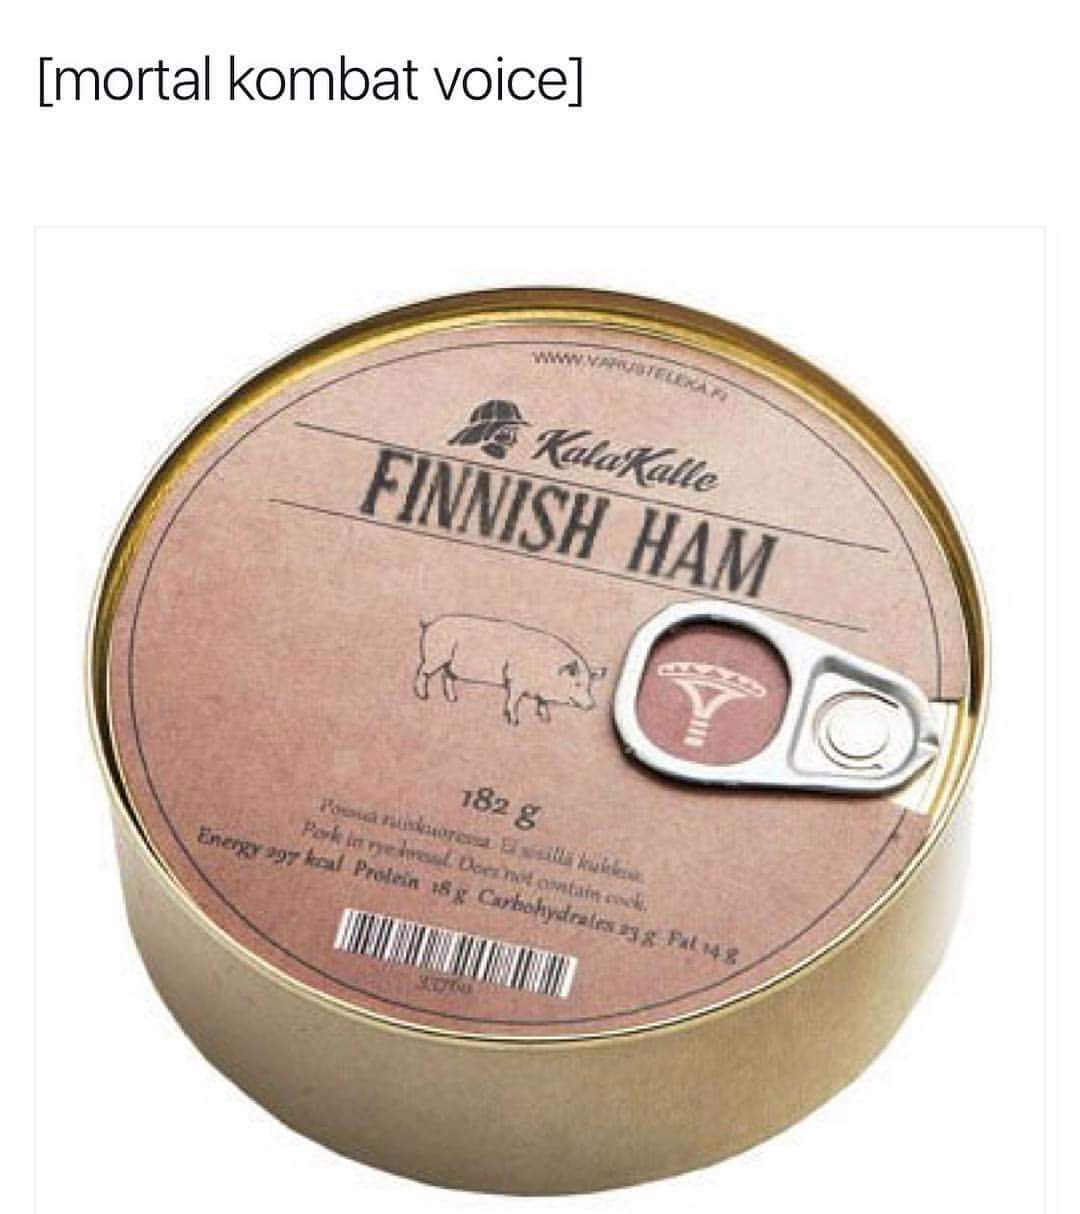 funny gaming memes - finnish ham - Imortal kombat voicel Kala Kalle Finnish Ham Posua Energy 397 kcal Protein 18 g Carbohydrates 38 Ful Parkimine sore Does not contain cock l la luce 182 g Juuntautunnu